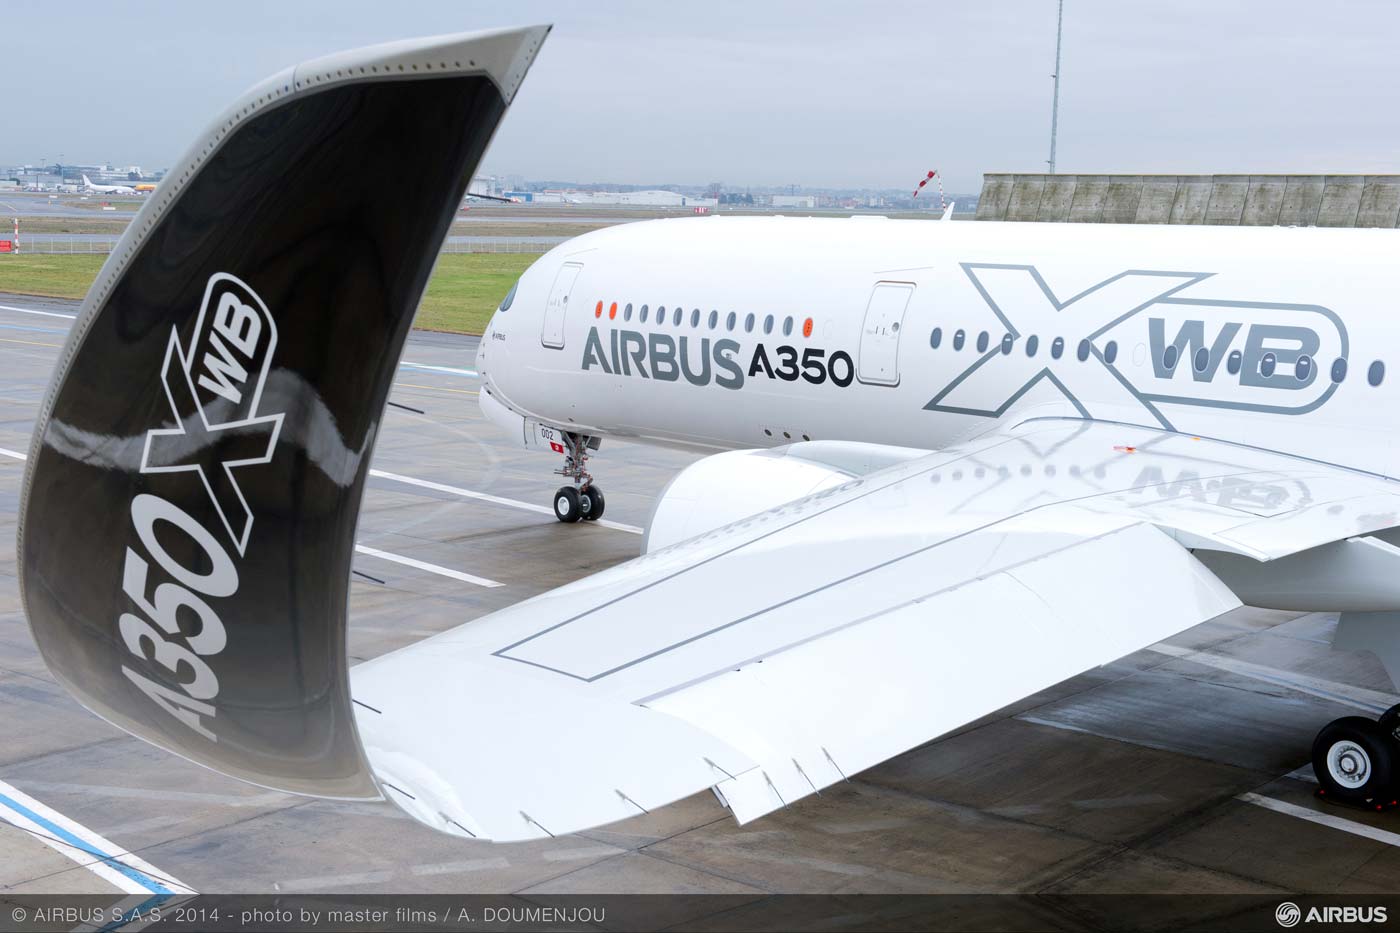 Airbus A350 Winglet - Airbus A350 Xwb , HD Wallpaper & Backgrounds